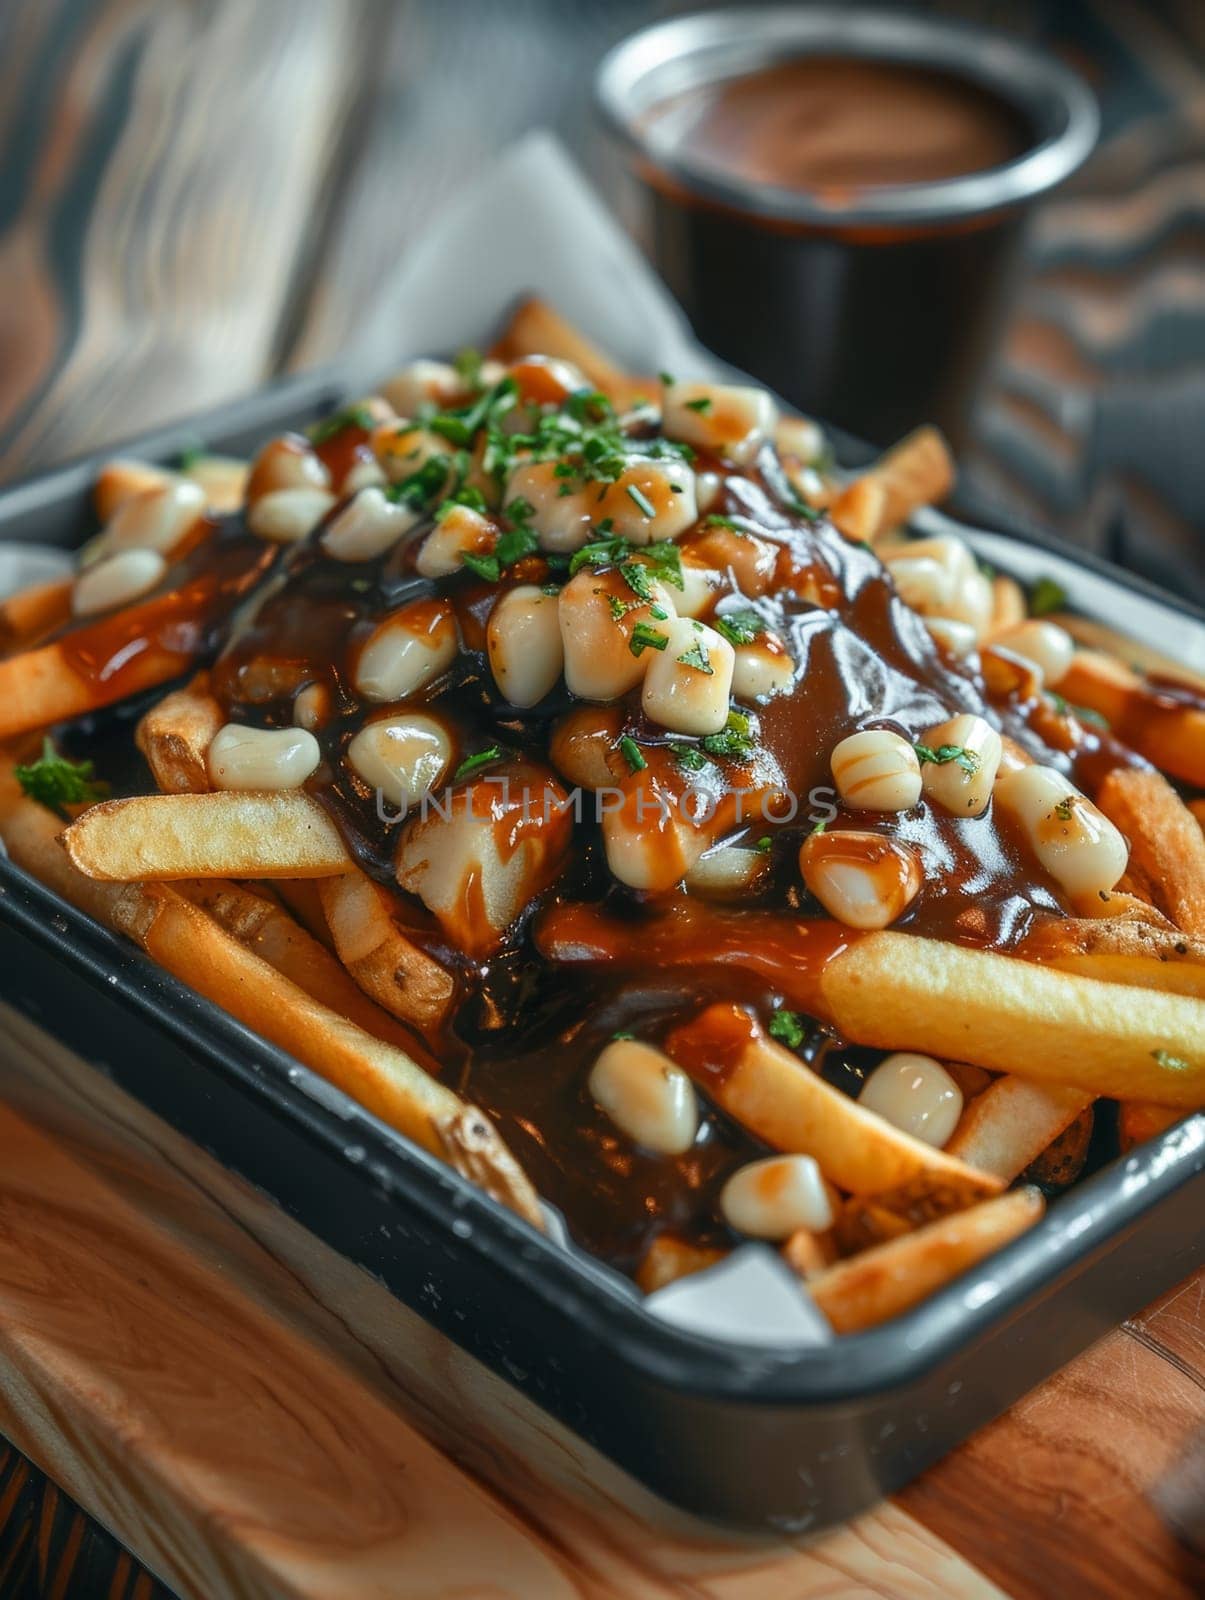 Authentic Canadian poutine with golden fries, squeaky cheese curds, and rich brown gravy served in a tray, capturing the comforting and indulgent essence of this beloved French-Canadian culinary